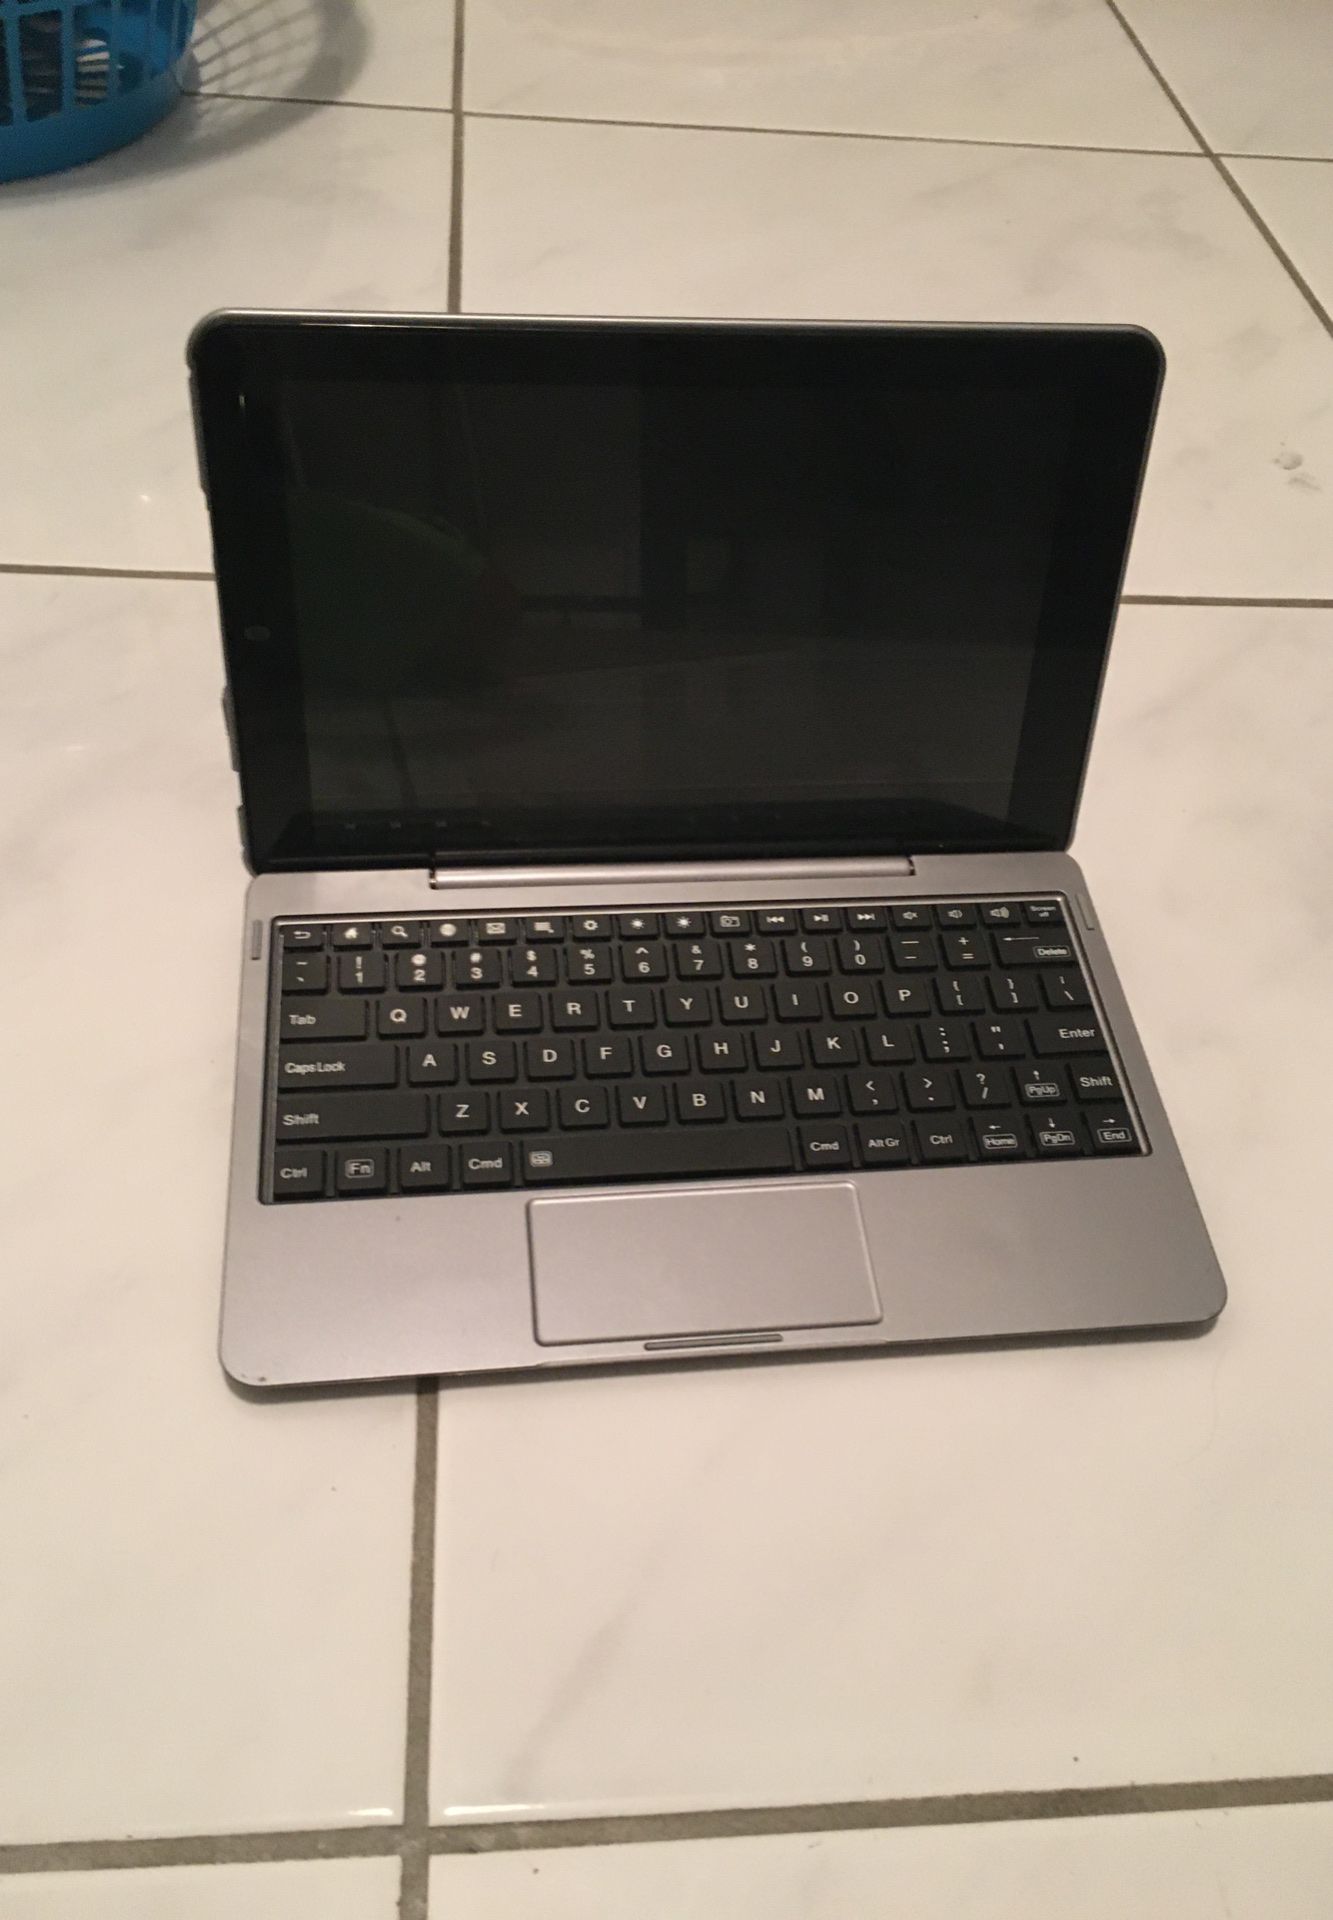 Mini laptop for business